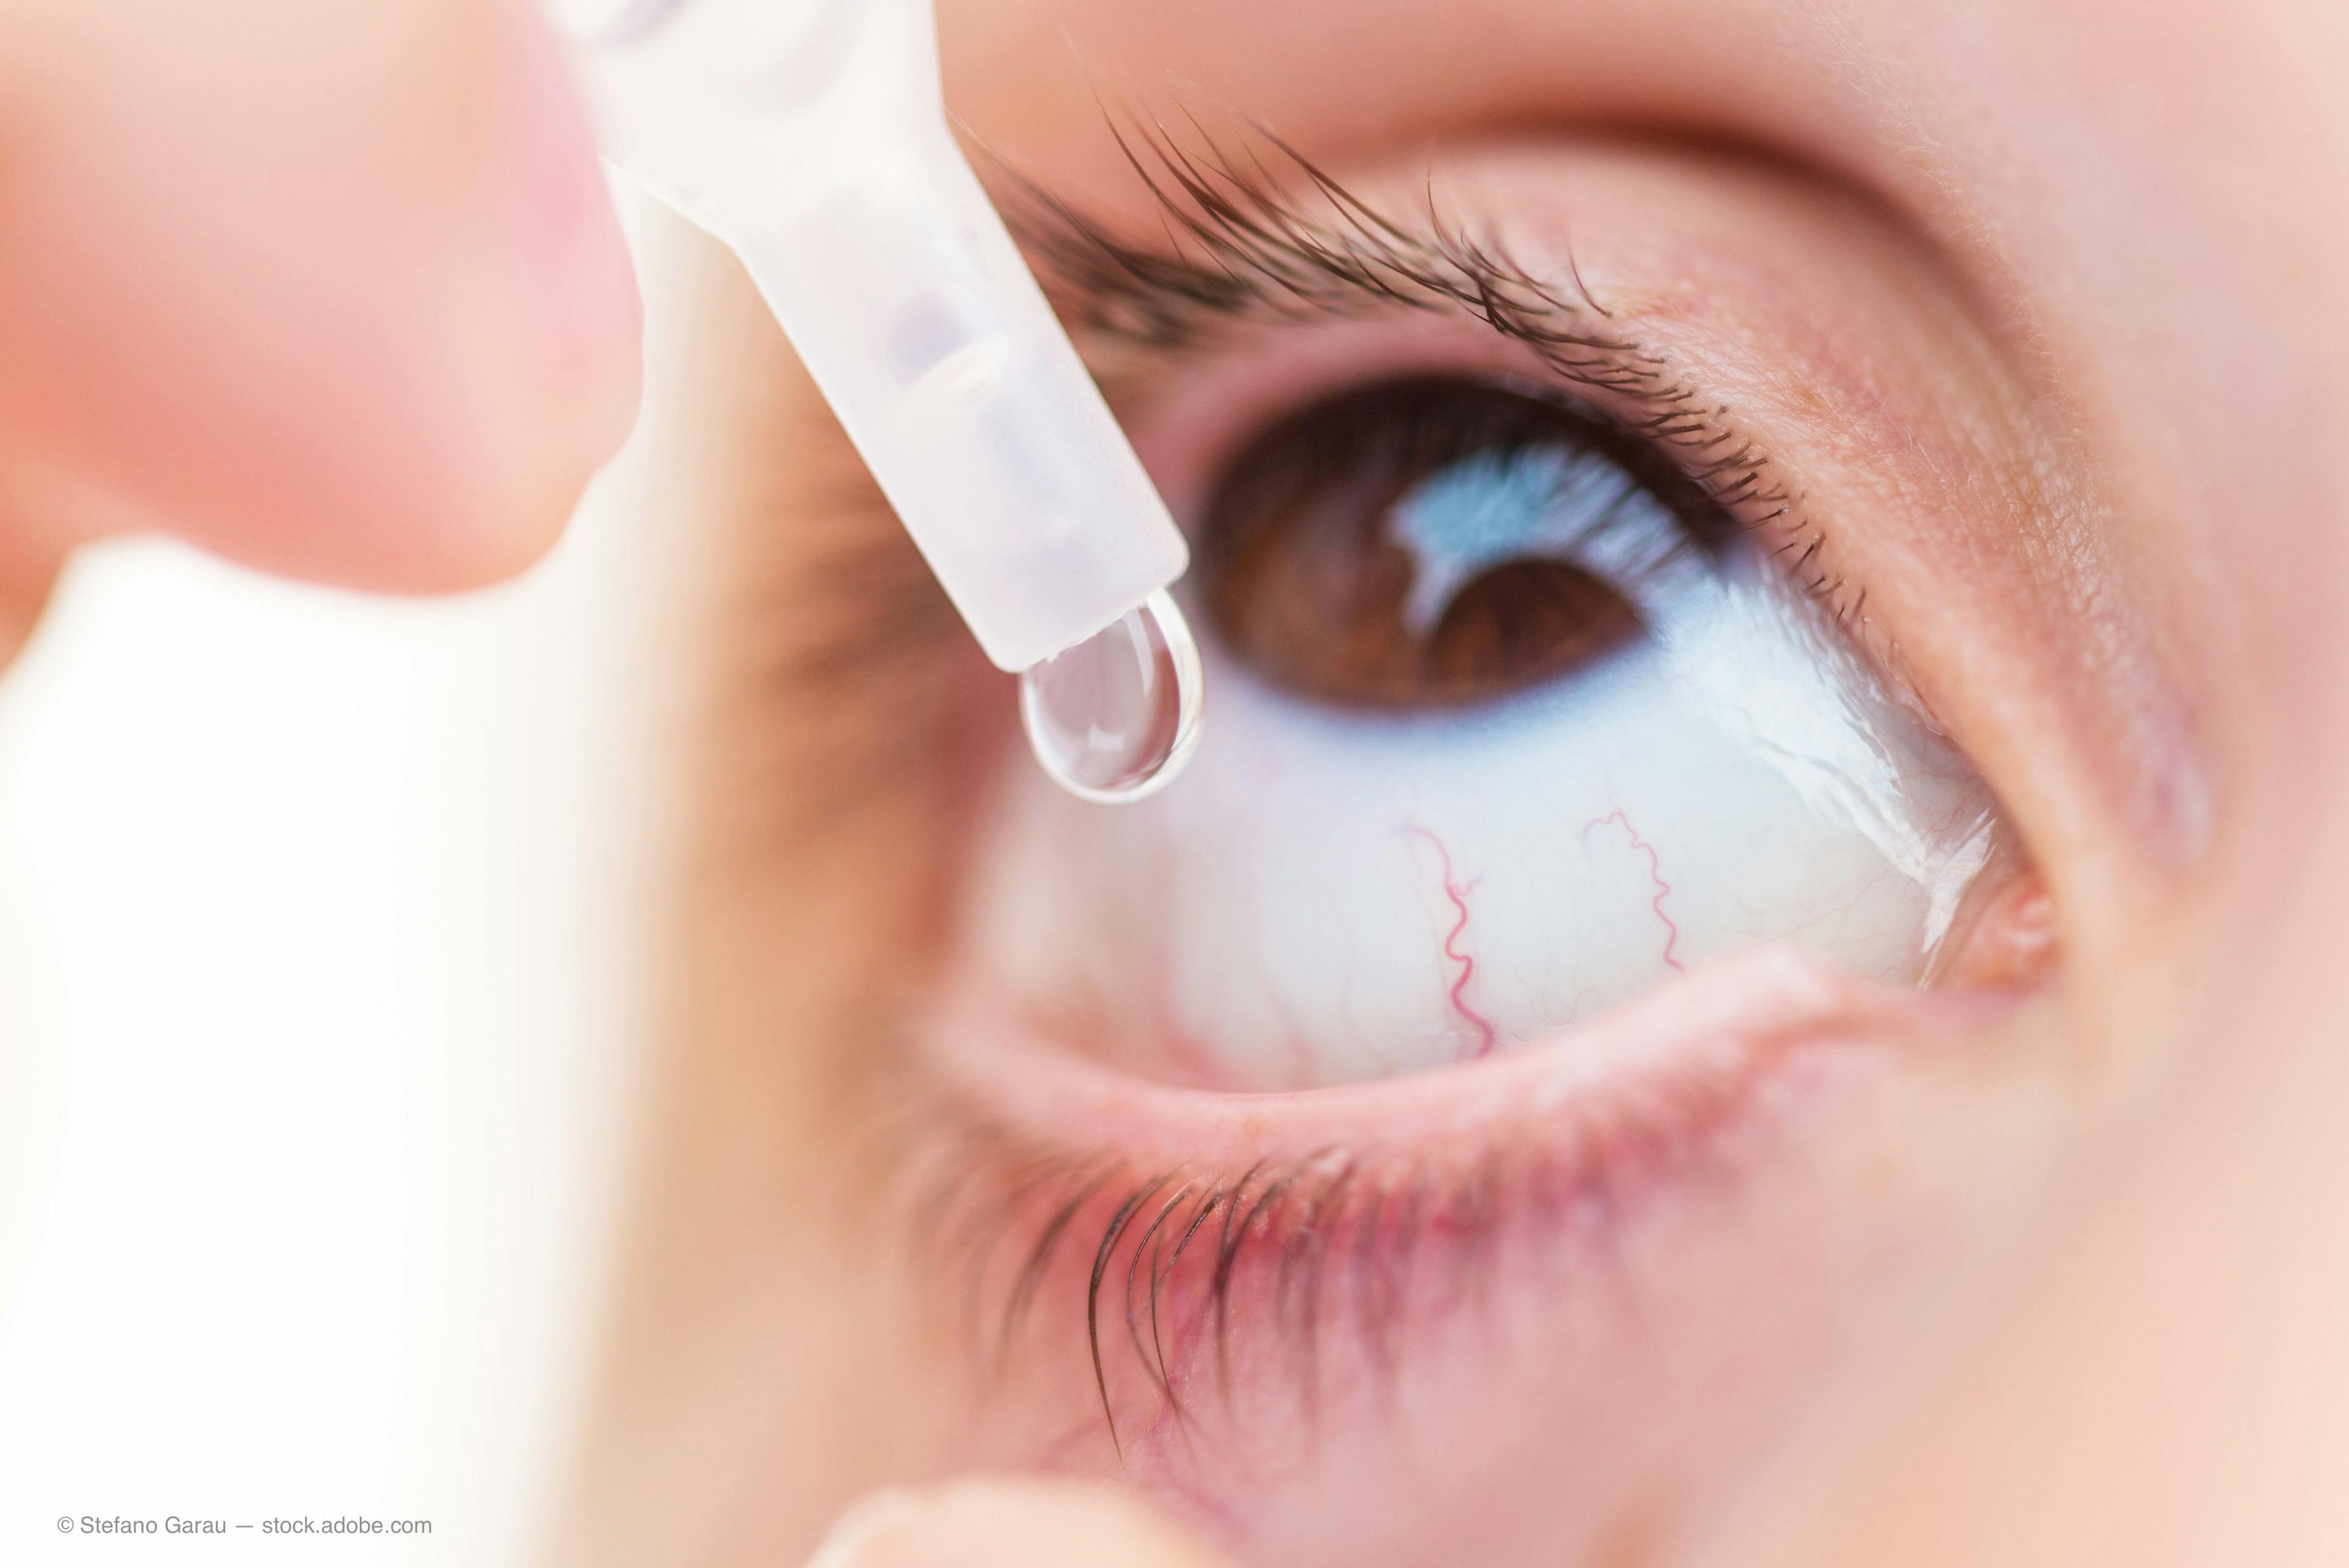 The FDA announced approval of the first generic version of Restasis (cyclosporine ophthalmic emulsion) 0.05% eye drops Thursday.